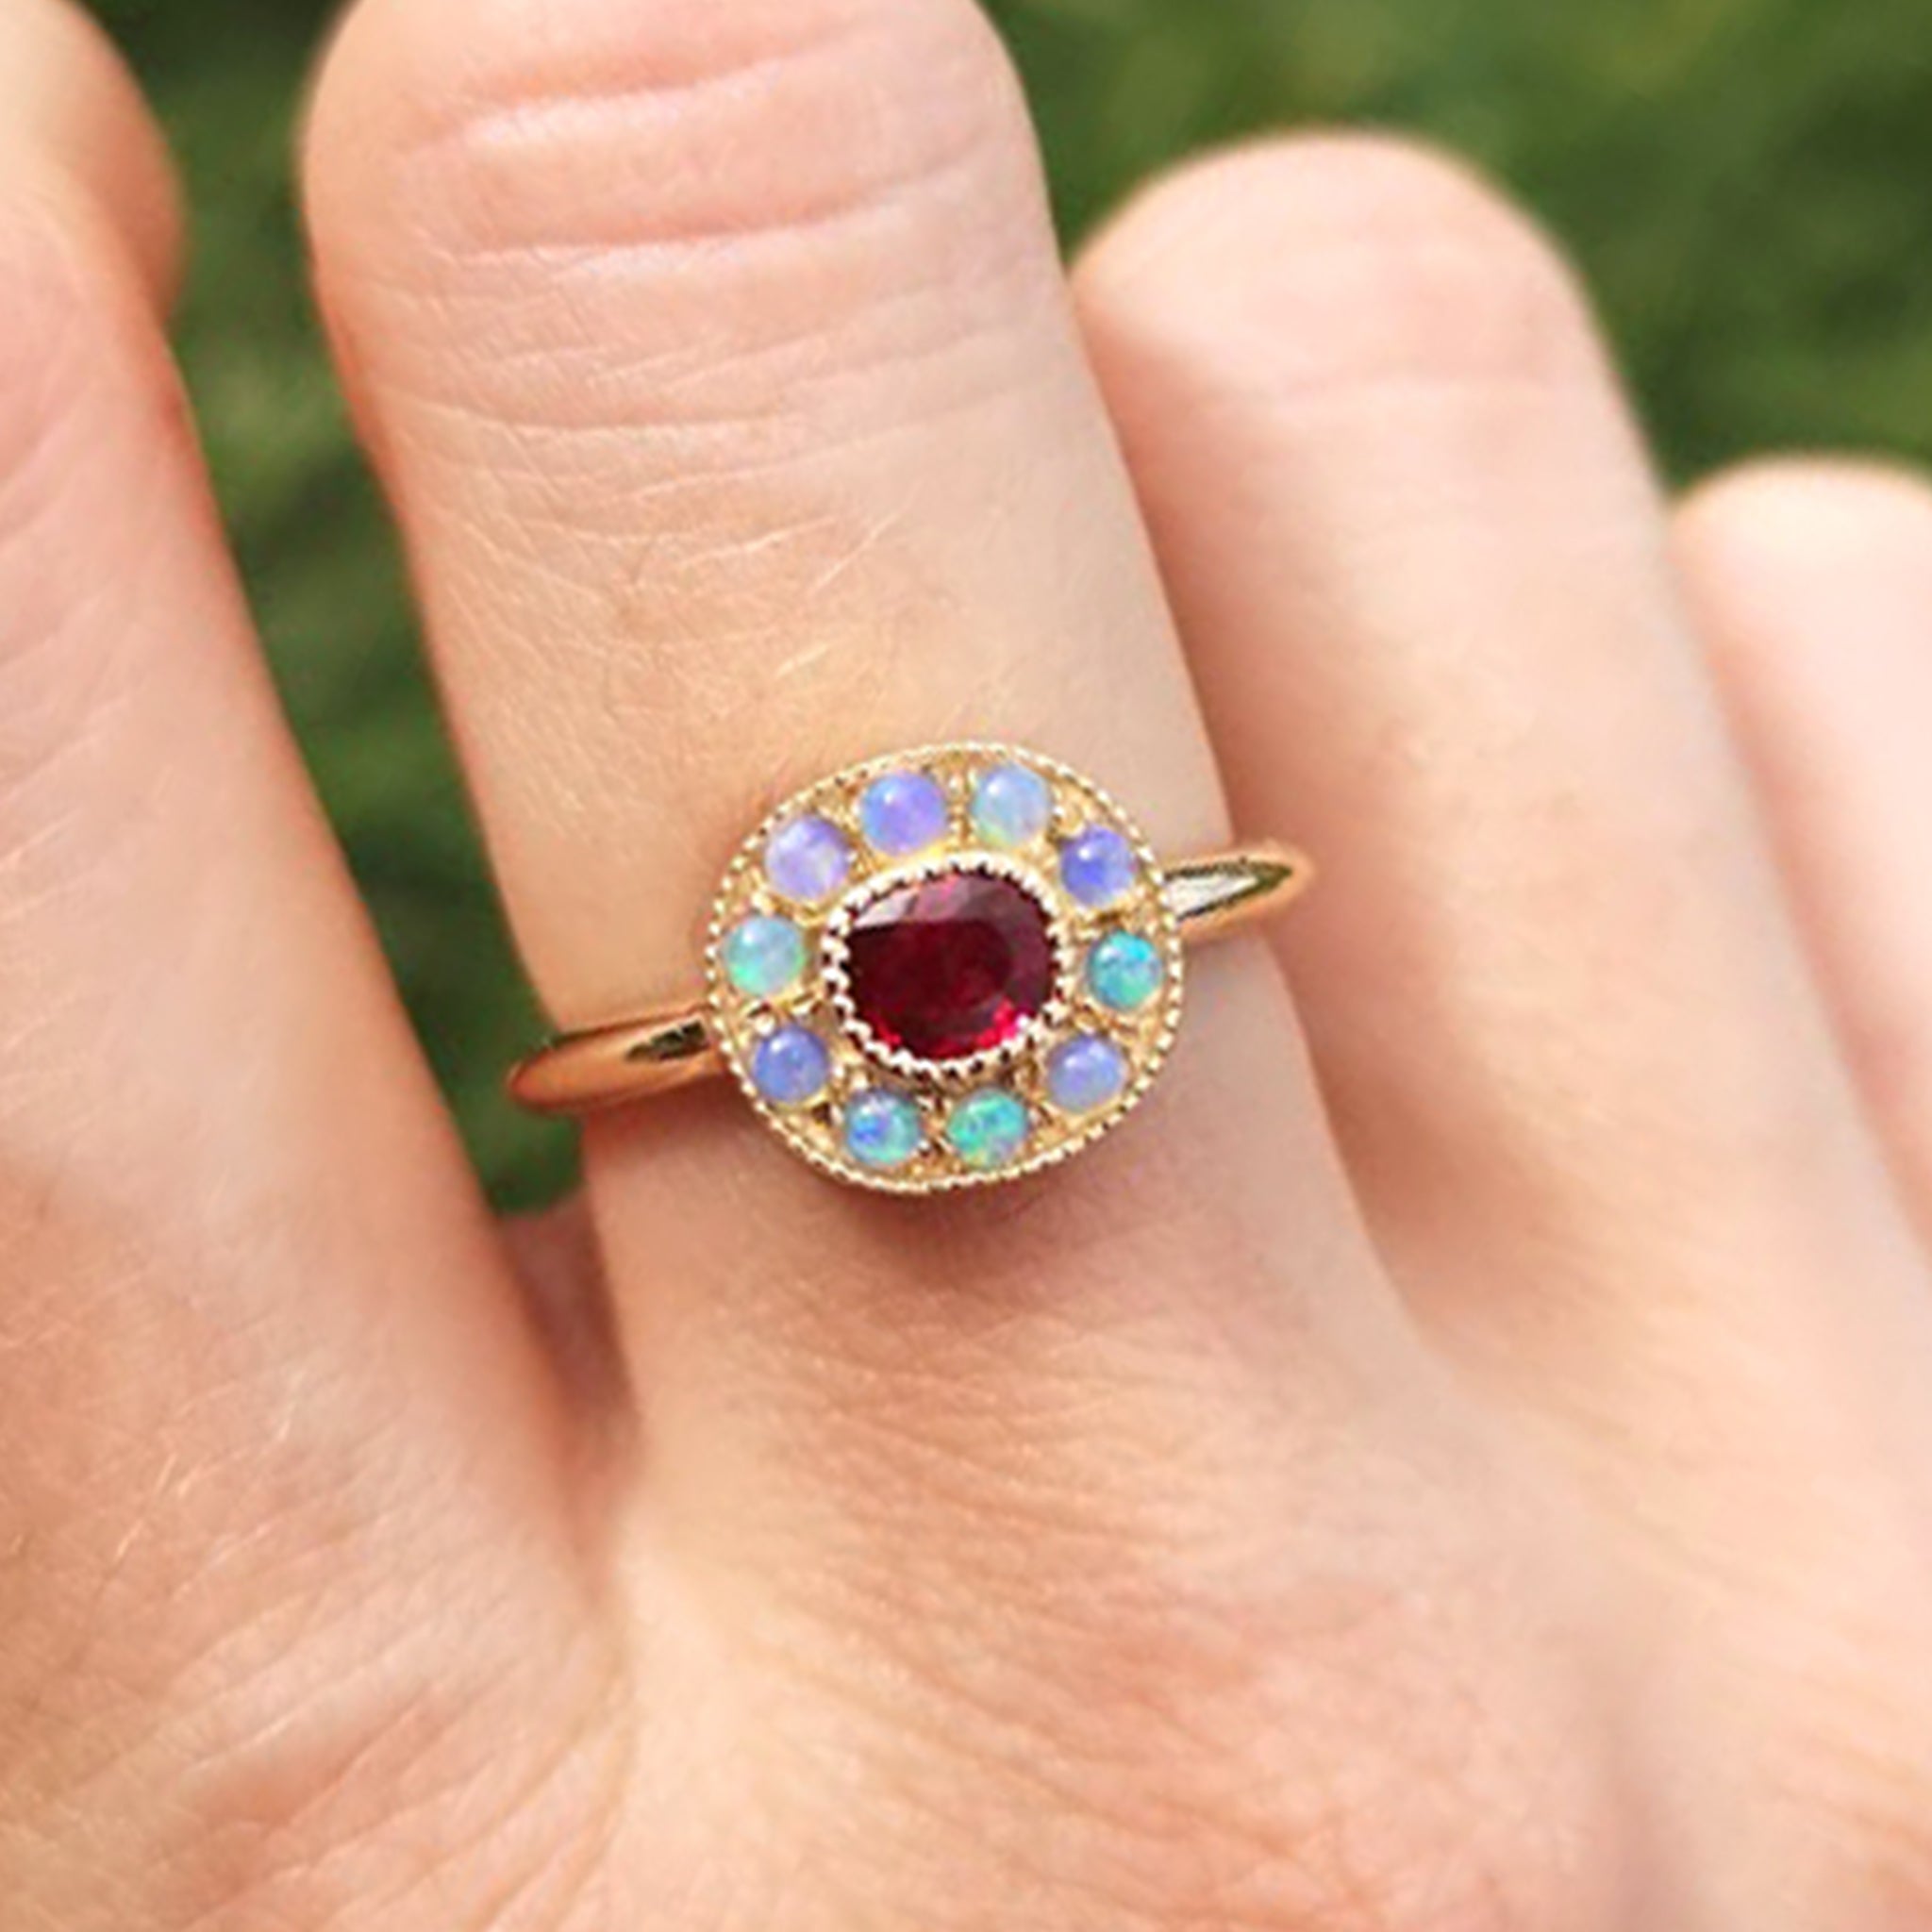 Close-up view of the one-of-a-kind Ruby halo ring with mini Australian opals, retro-antique inspired design by Lico Jewelry, set in solid 14k yellow gold, on a woman's middle finger.